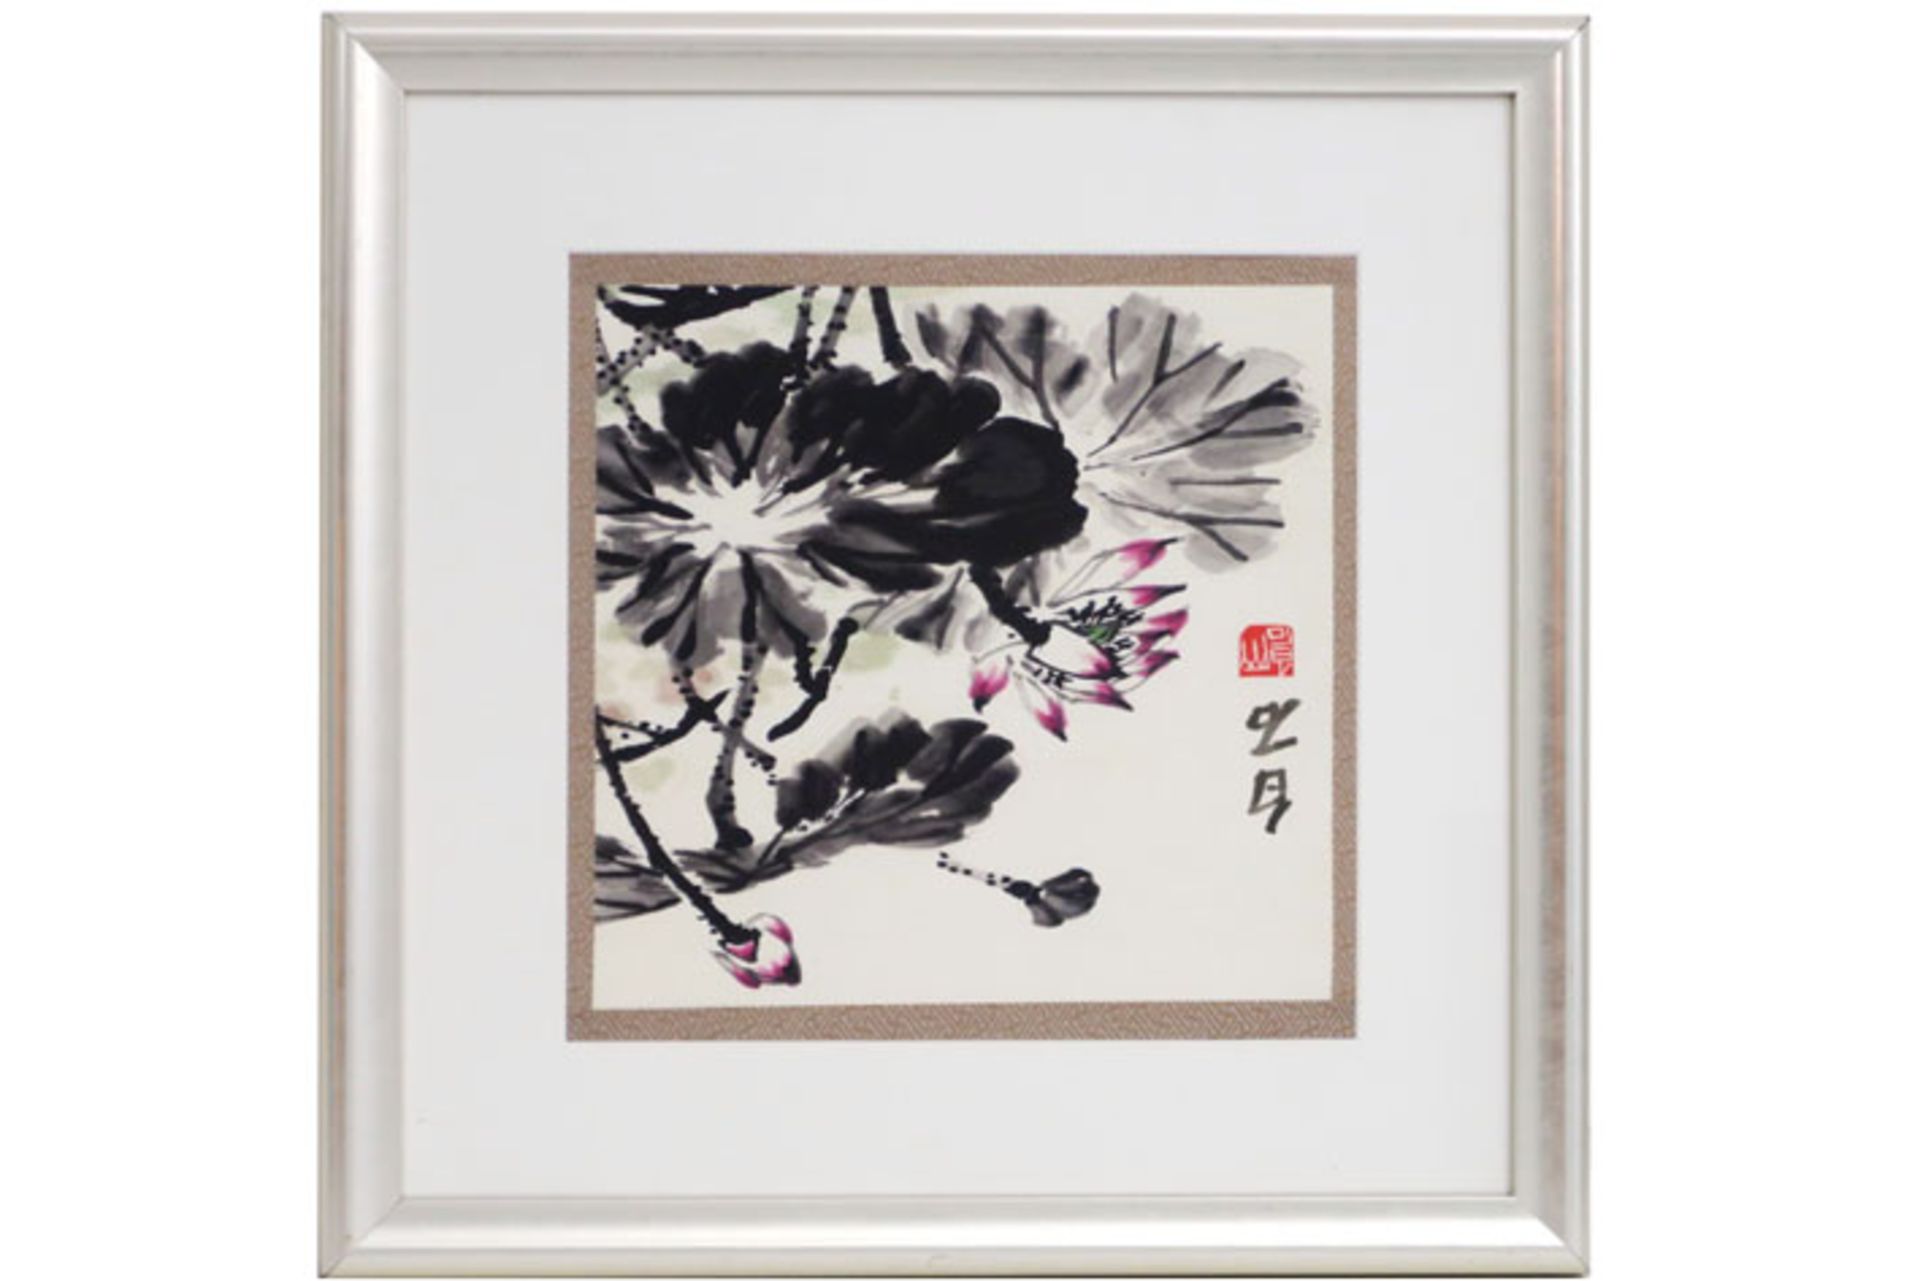 20th Cent. Chinese aquarelle - signed / attributed to Baishi QI prov : Sino-Belgian [...]